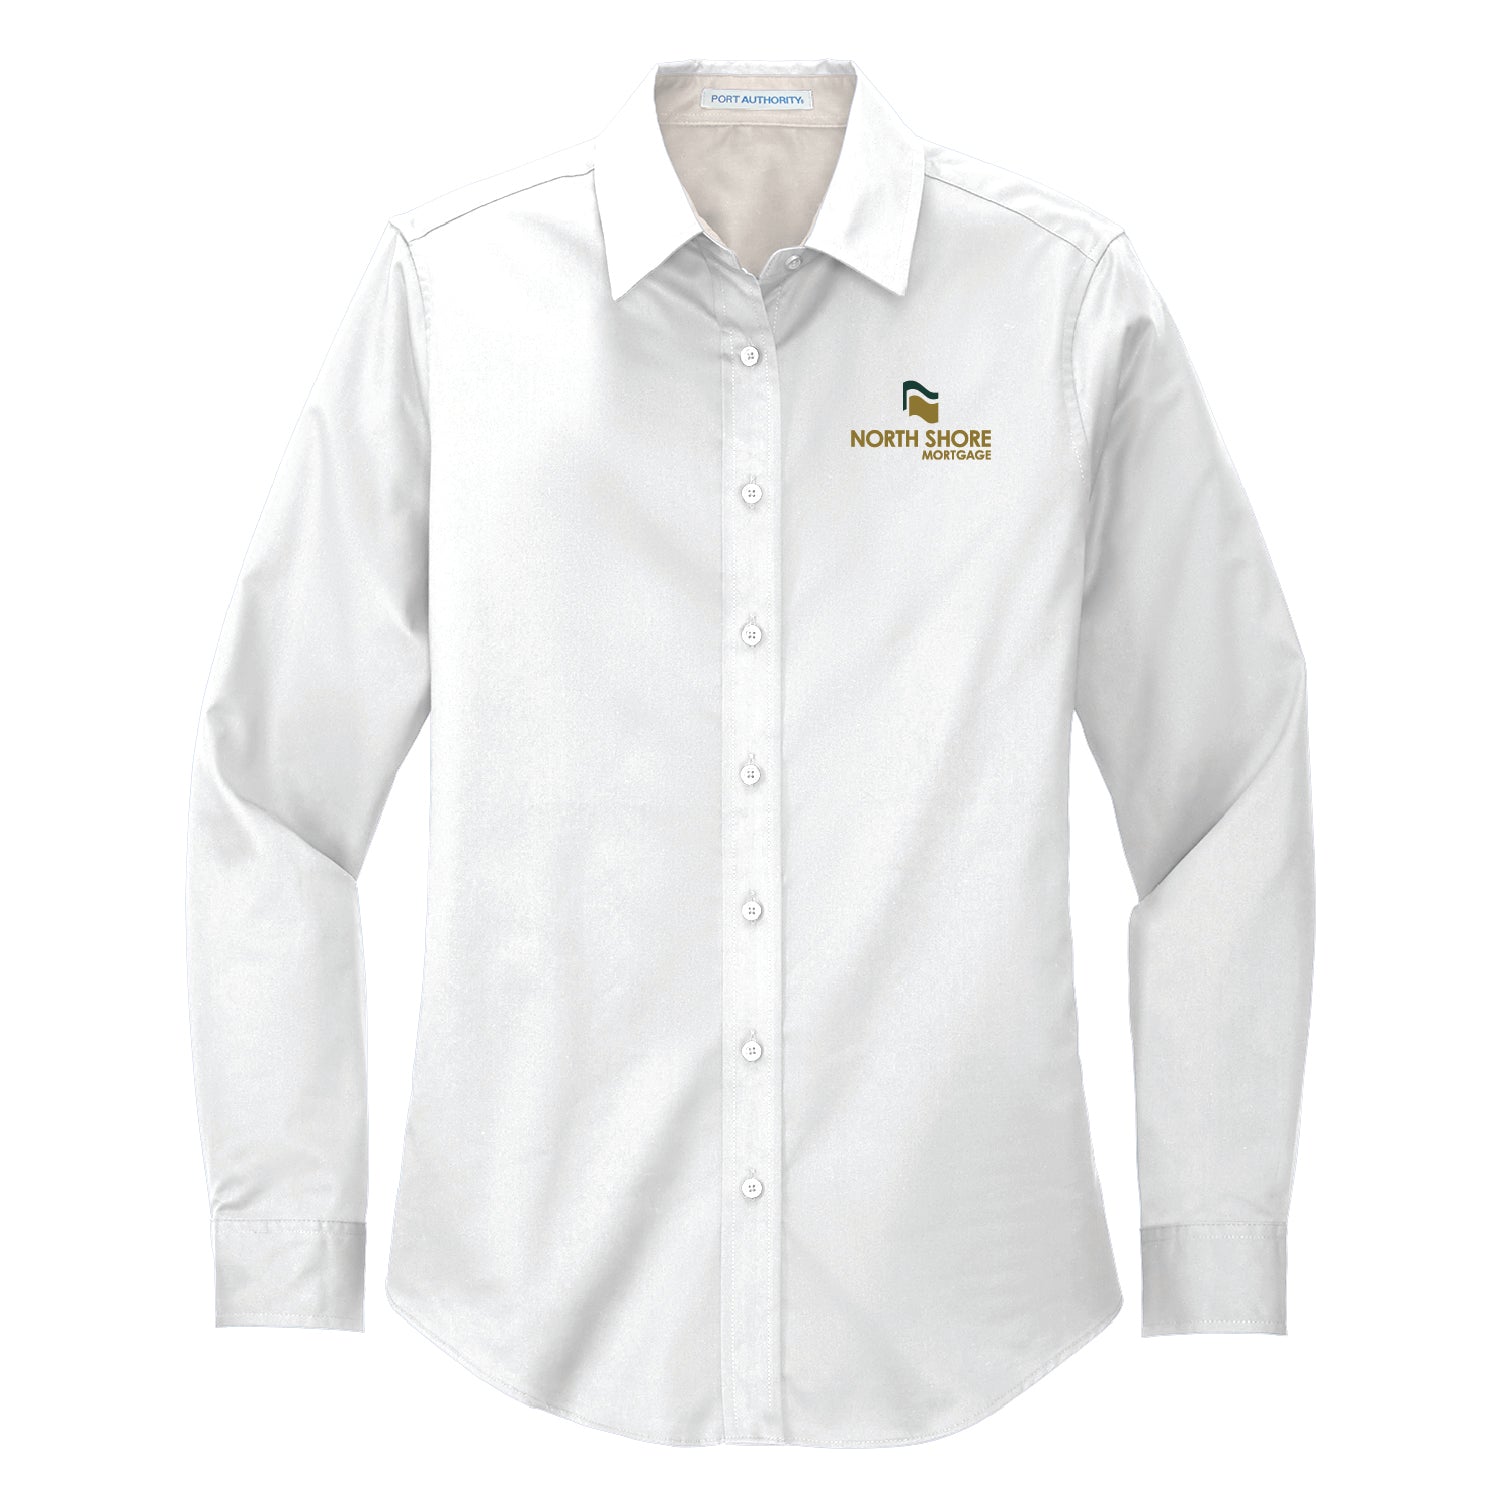 NSB Mortgage Ladies Long Sleeve Easy Care Shirt - DSP On Demand